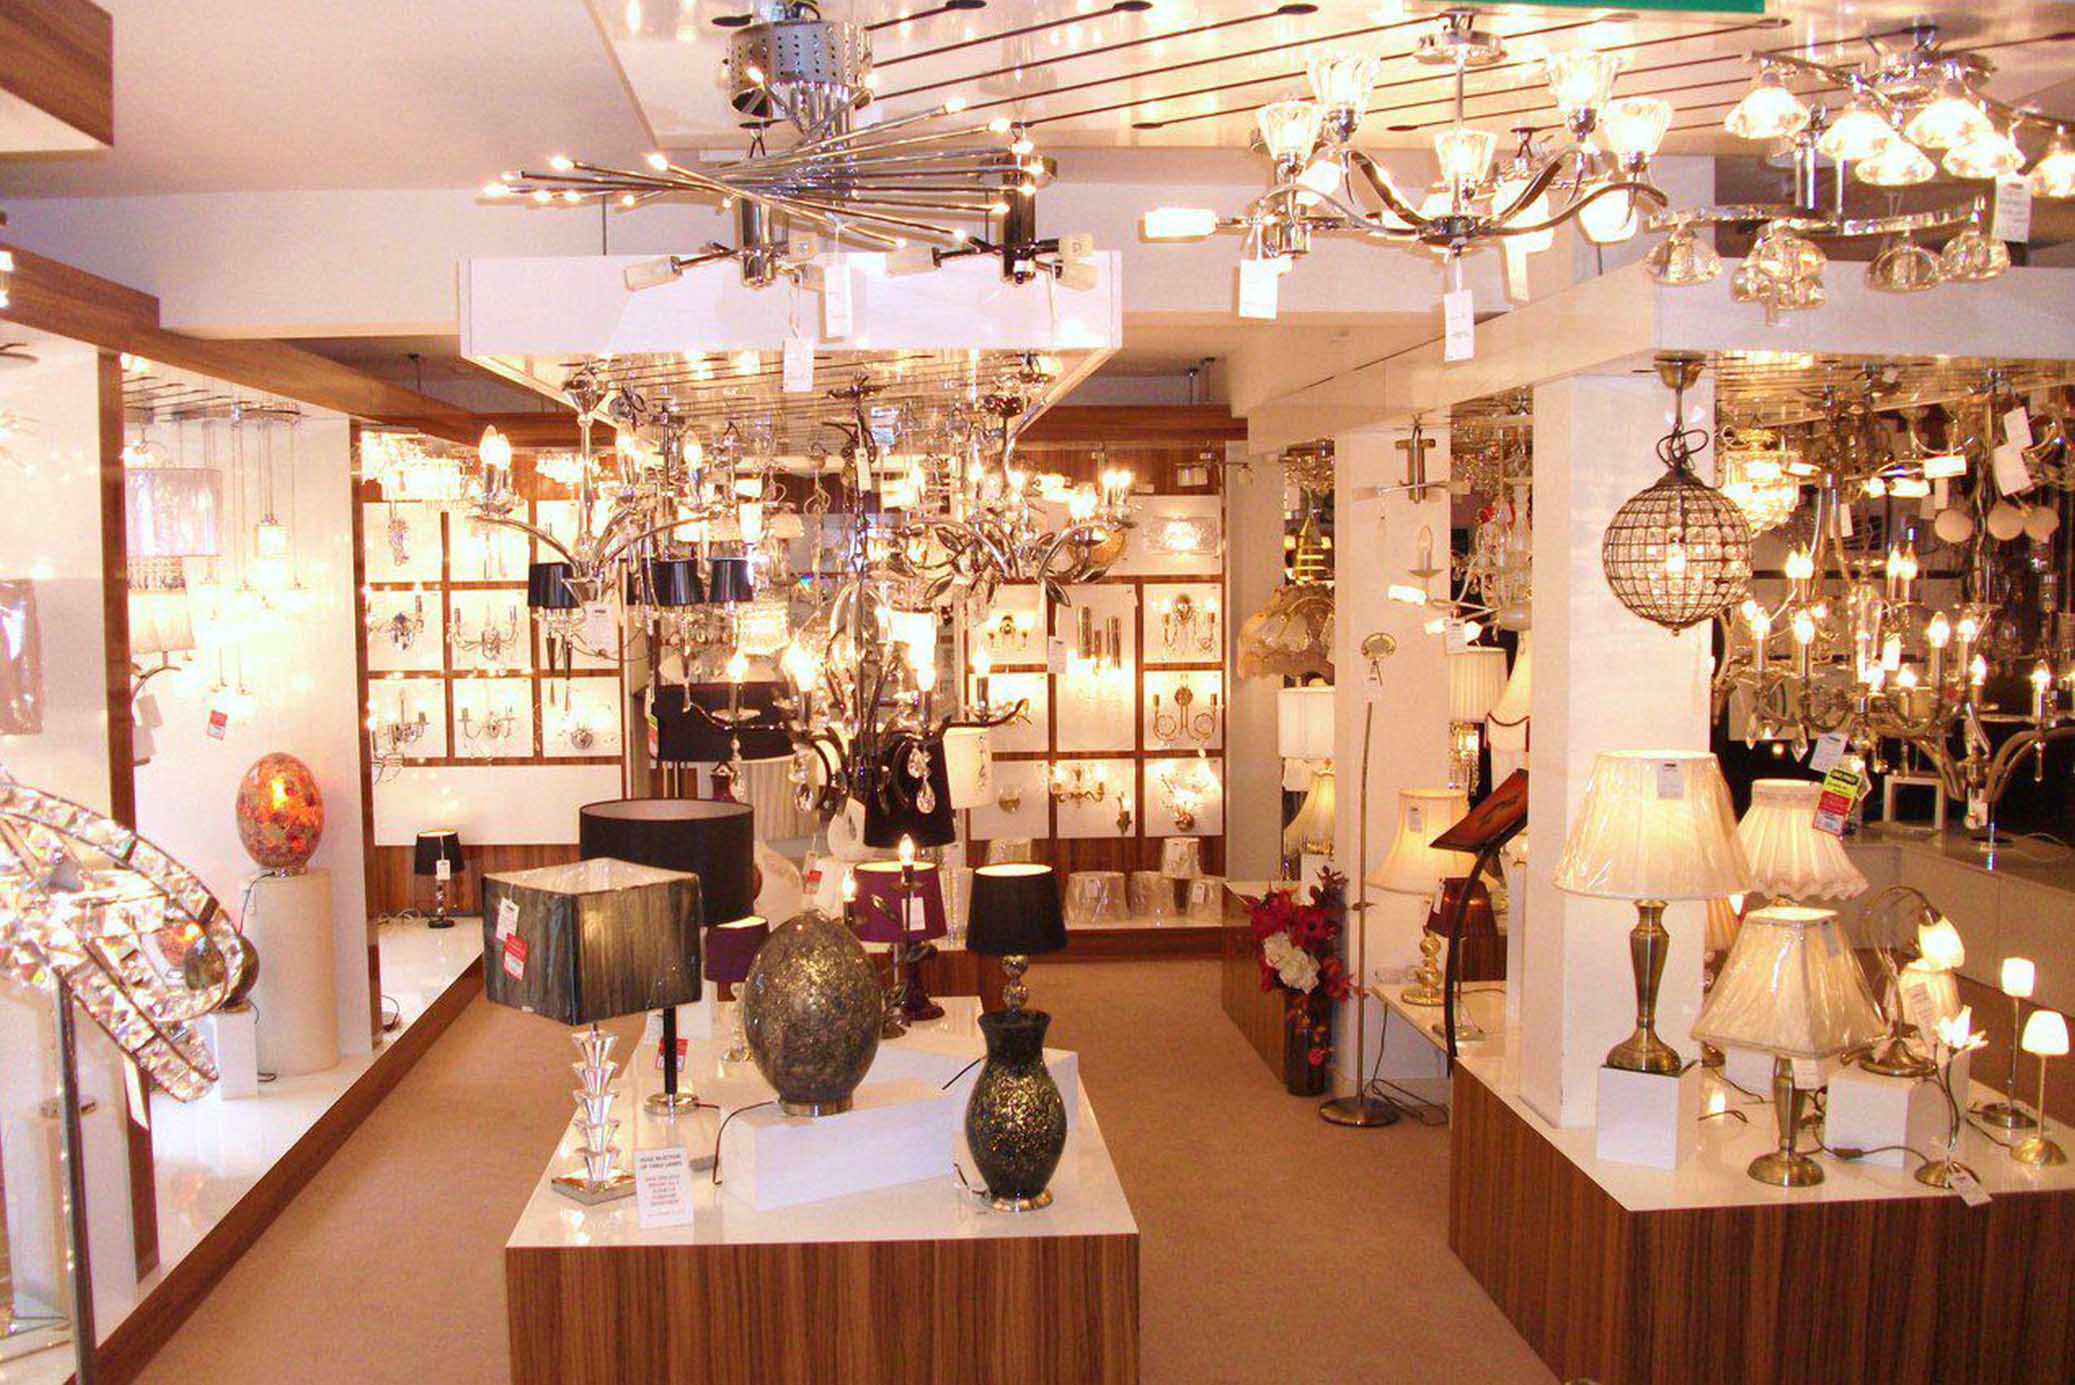 Lighting store ru. Shop Lighting. Best Goodine shop светильники. Light at shops. Lamps in Singapore.